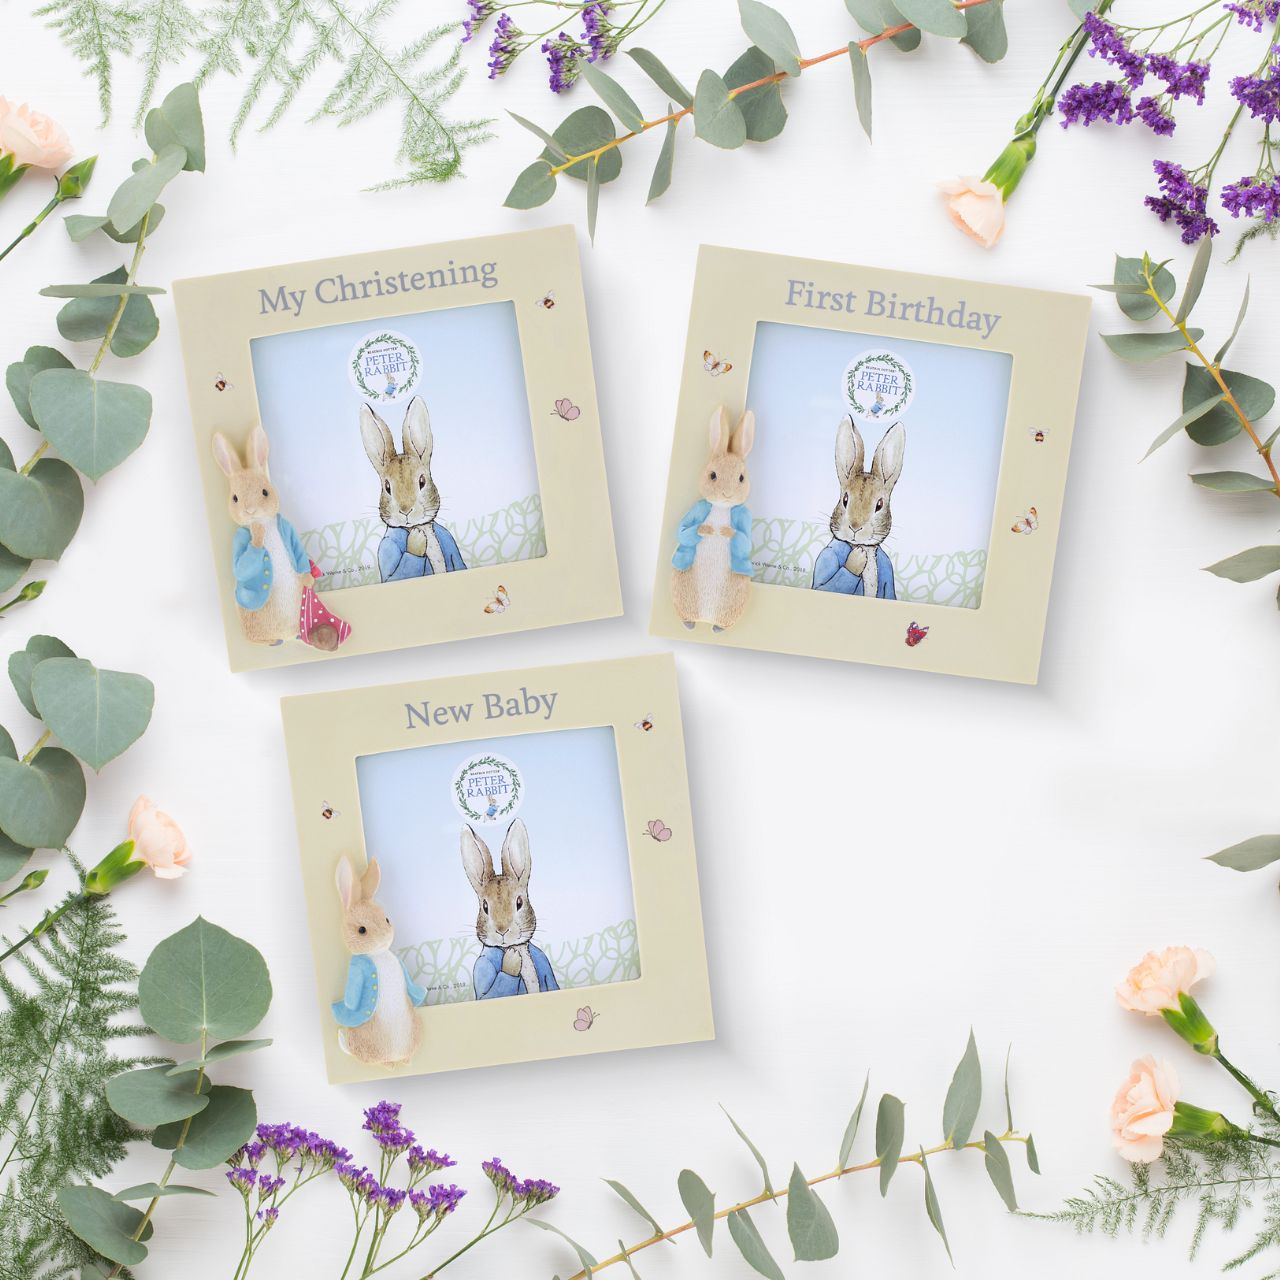 Peter Rabbit New Baby Photo Frame  Celebrate a new bundle of joy with this Peter Rabbit new baby photo frame, a perfect way to display a treasured photo. Complete with original illustrations from the Beatrix Potter stories. Photo frame fits square sized photos.